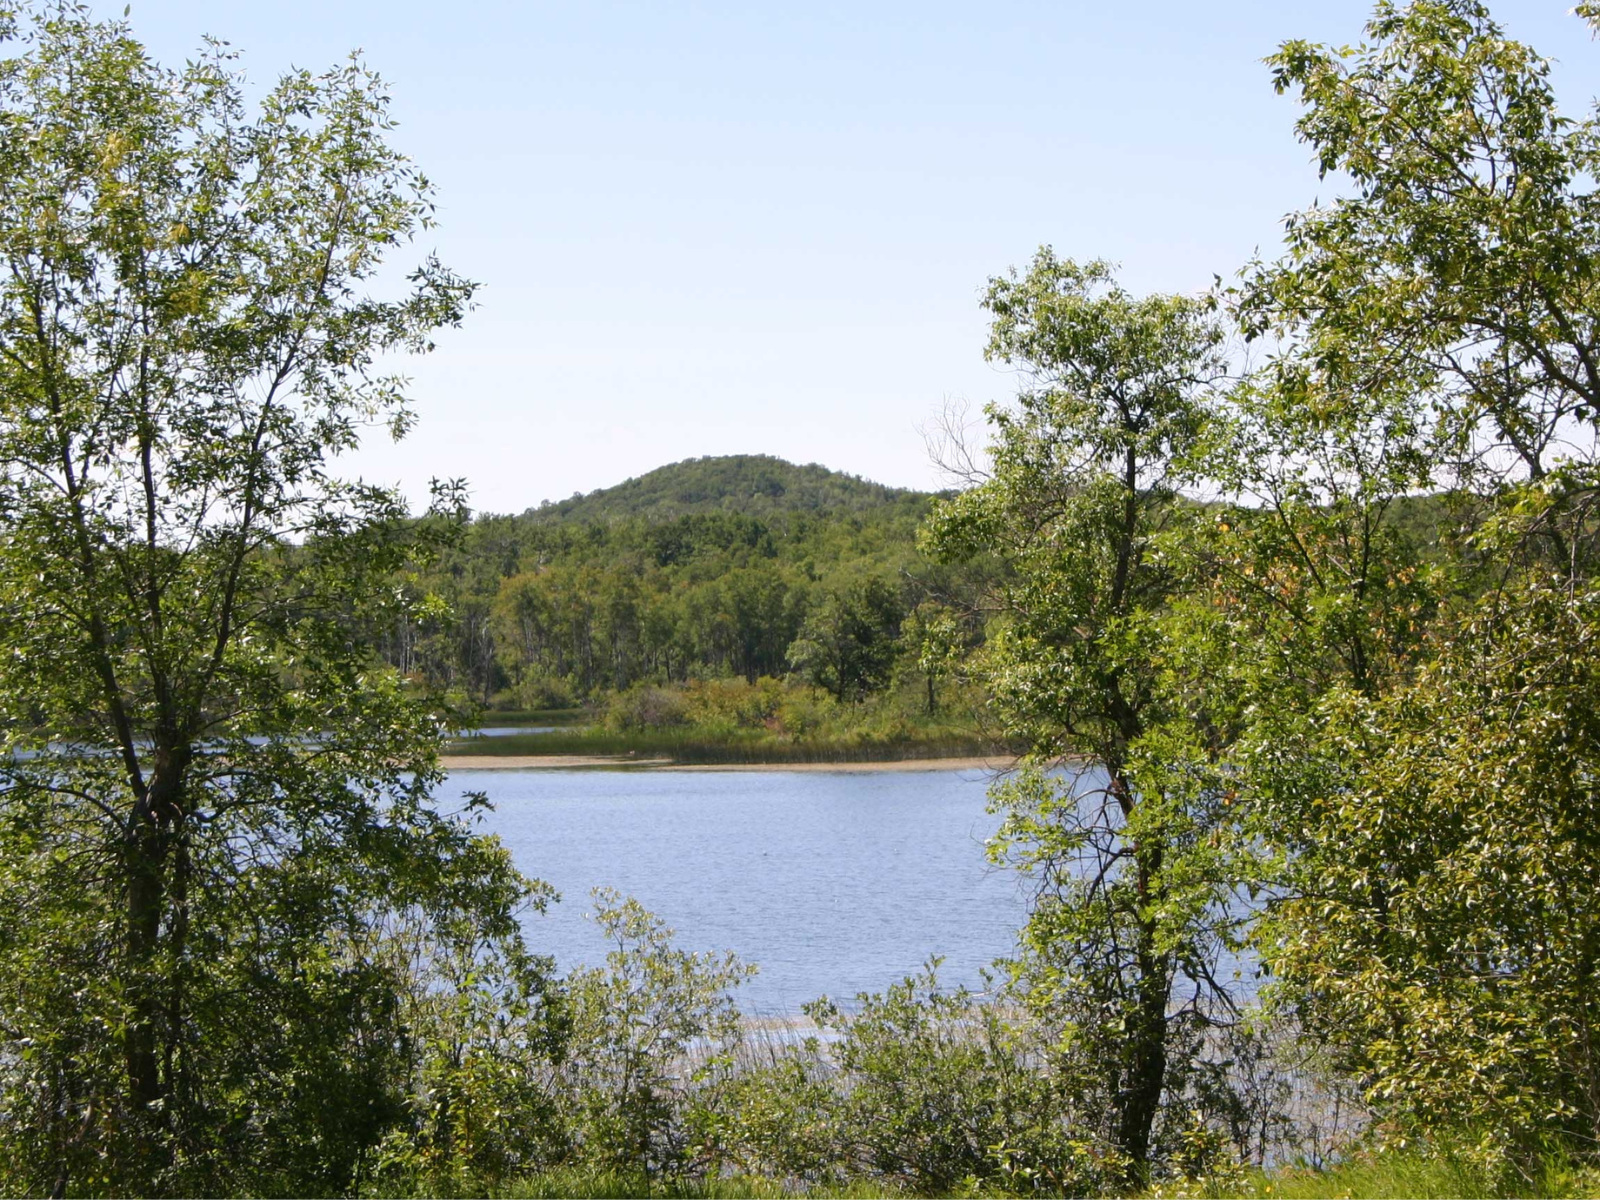 Looking out through a break in trees across a lake to a treed hill, "Turtle Mountain".